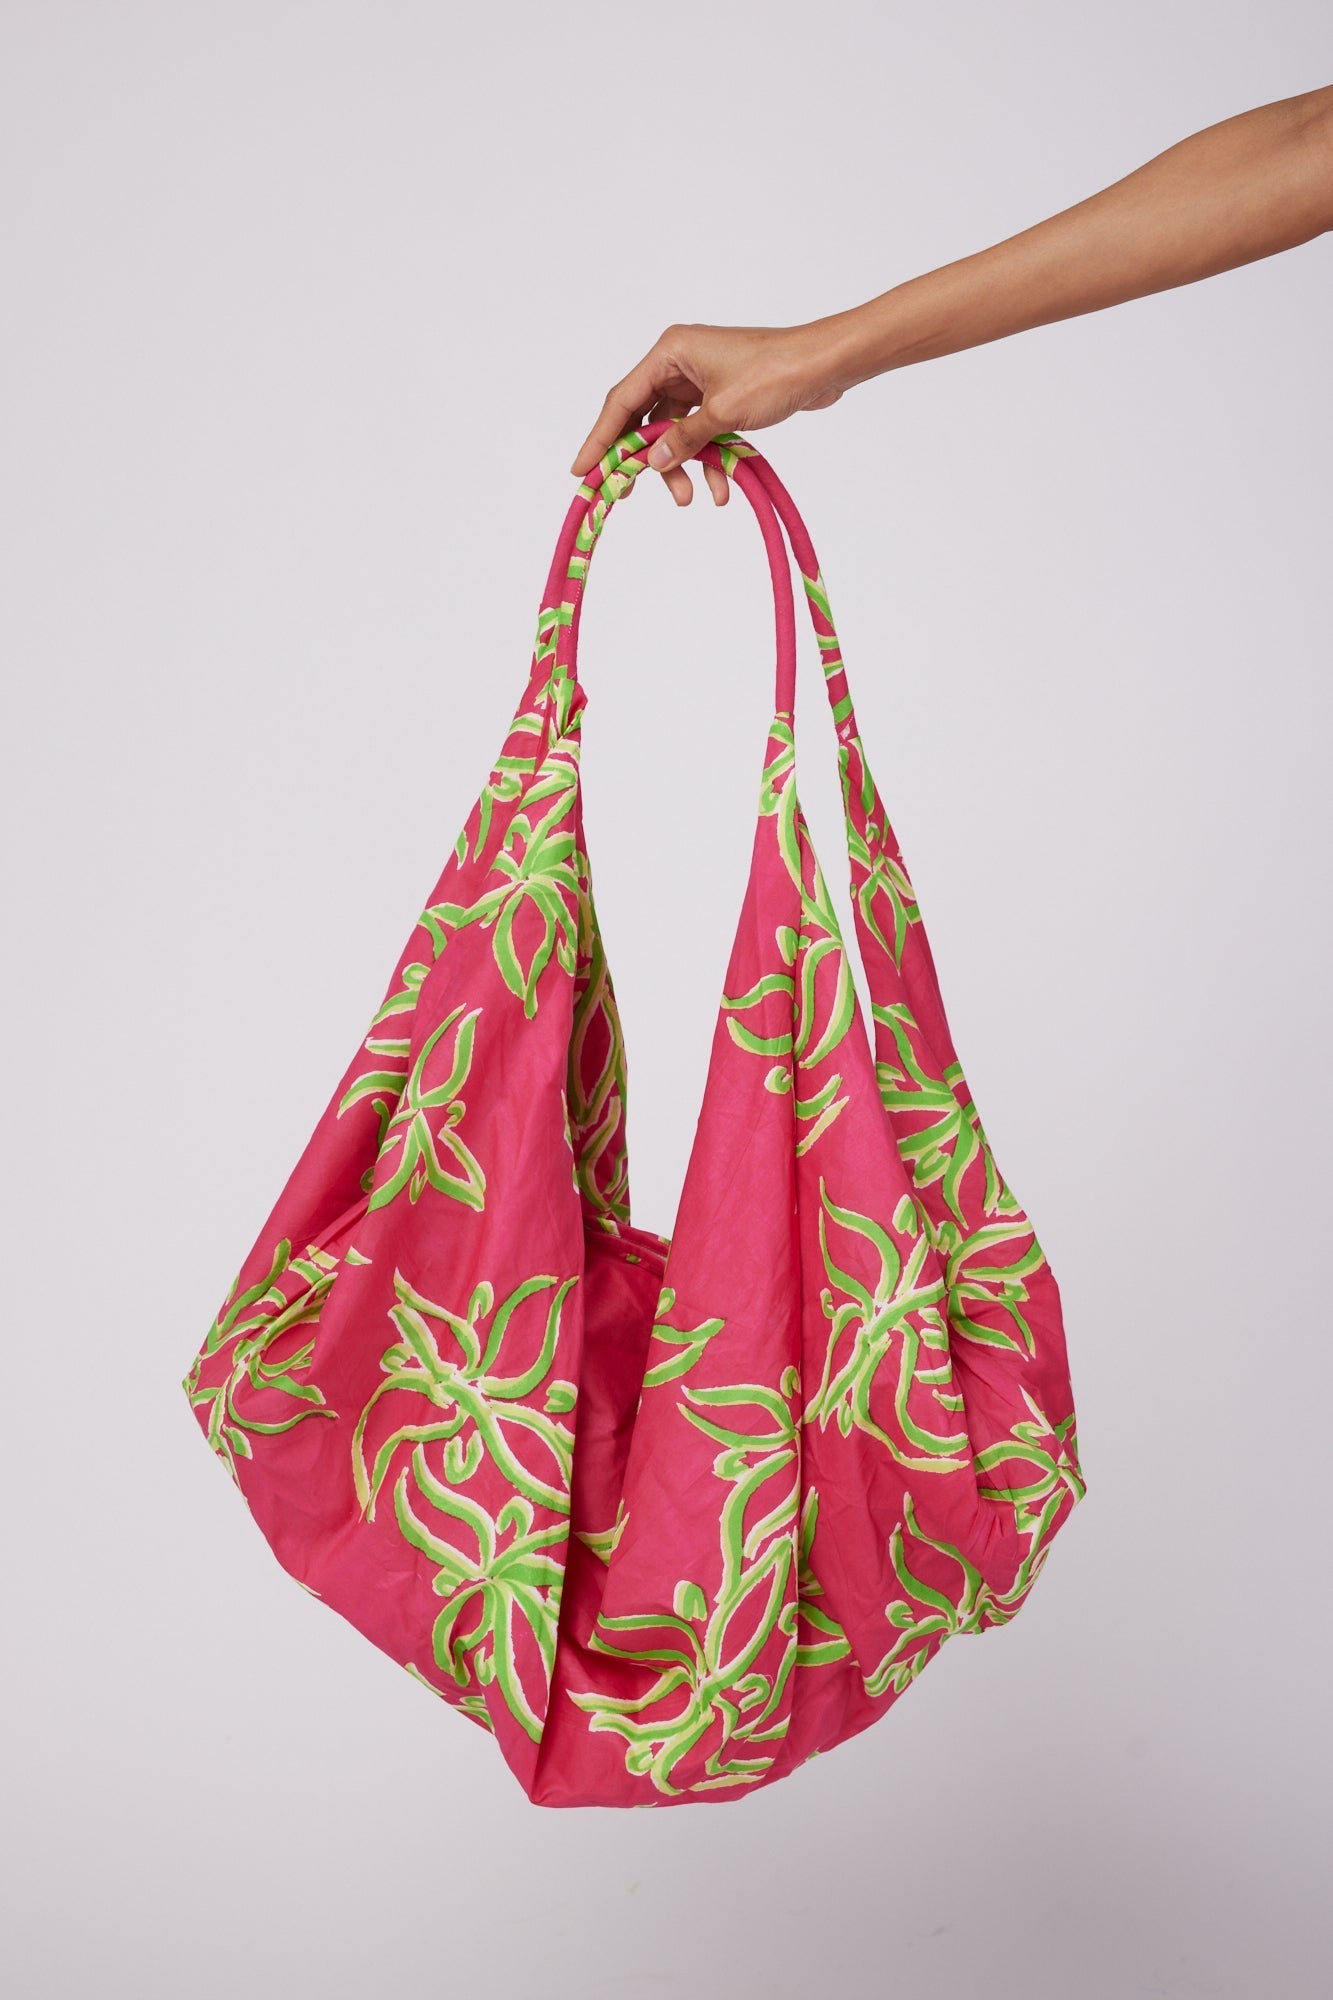 ModaPosa Adra Lined Hobo Beach Bag with Zip Closure in Raspberry Lime Flower . Discover women's resort dresses and lifestyle clothing inspired by the Mediterranean. Free worldwide shipping available!